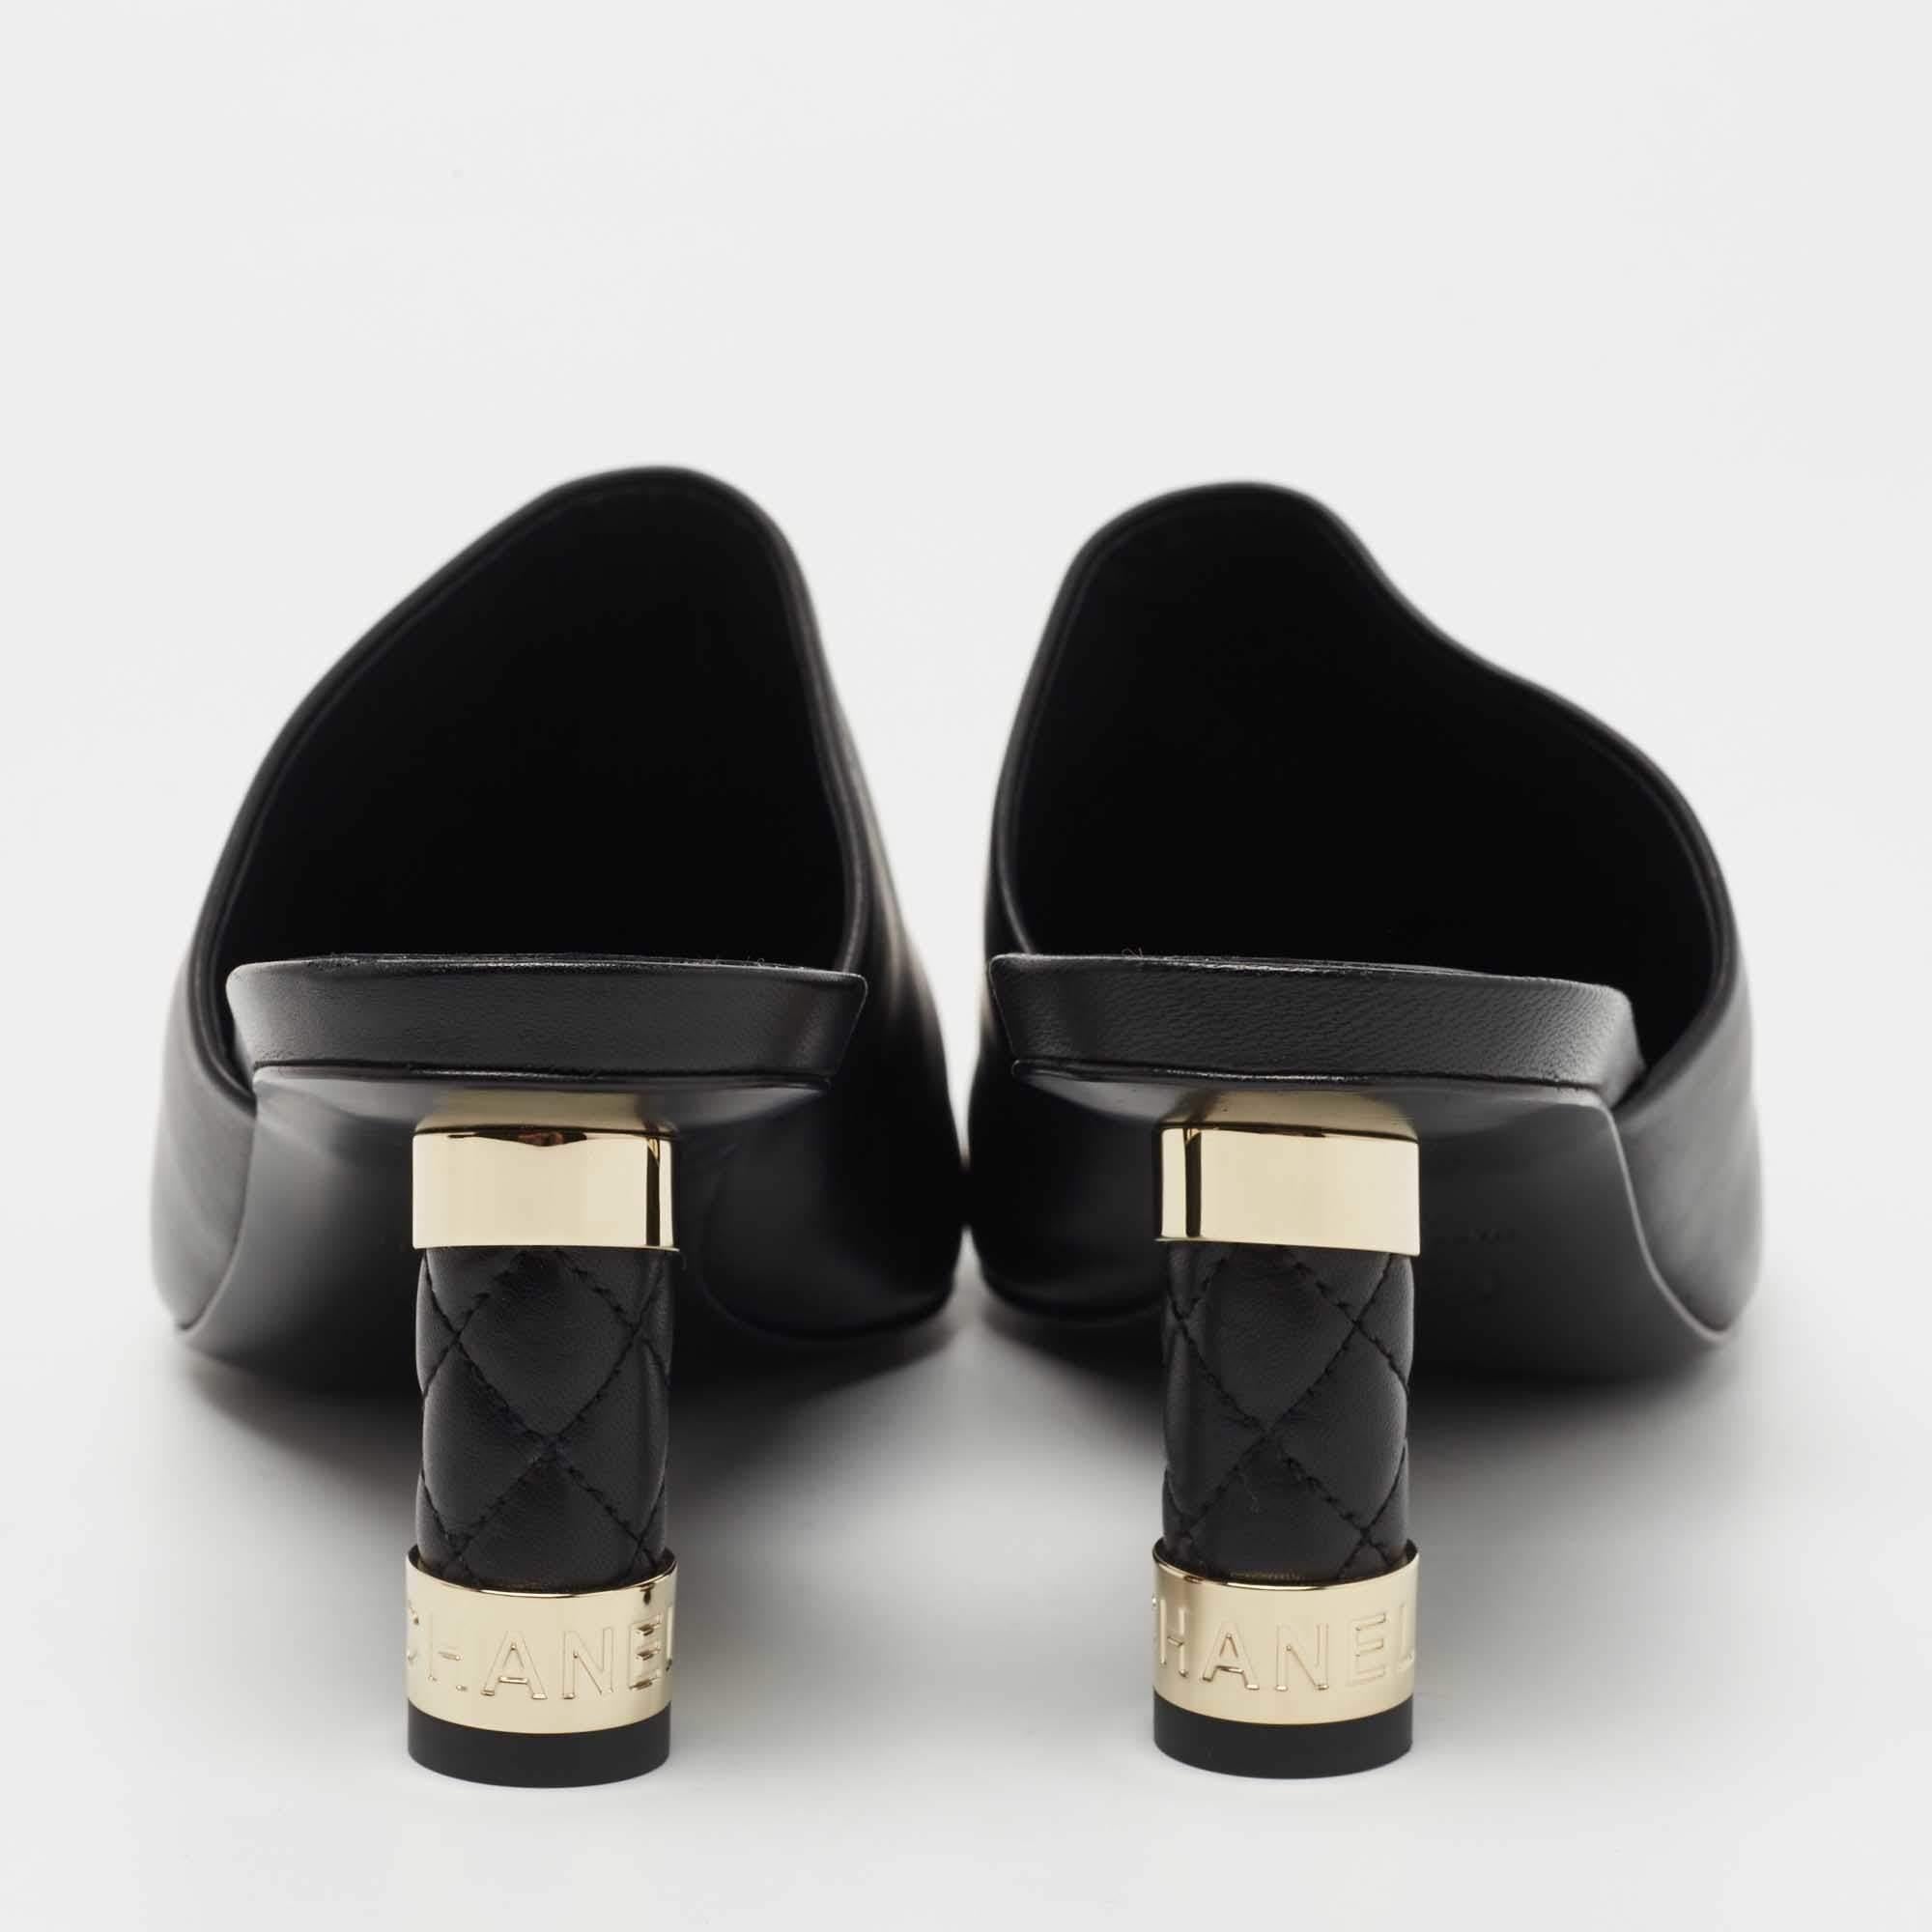 Chanel Black Leather Round Toe Mules Size 39 1